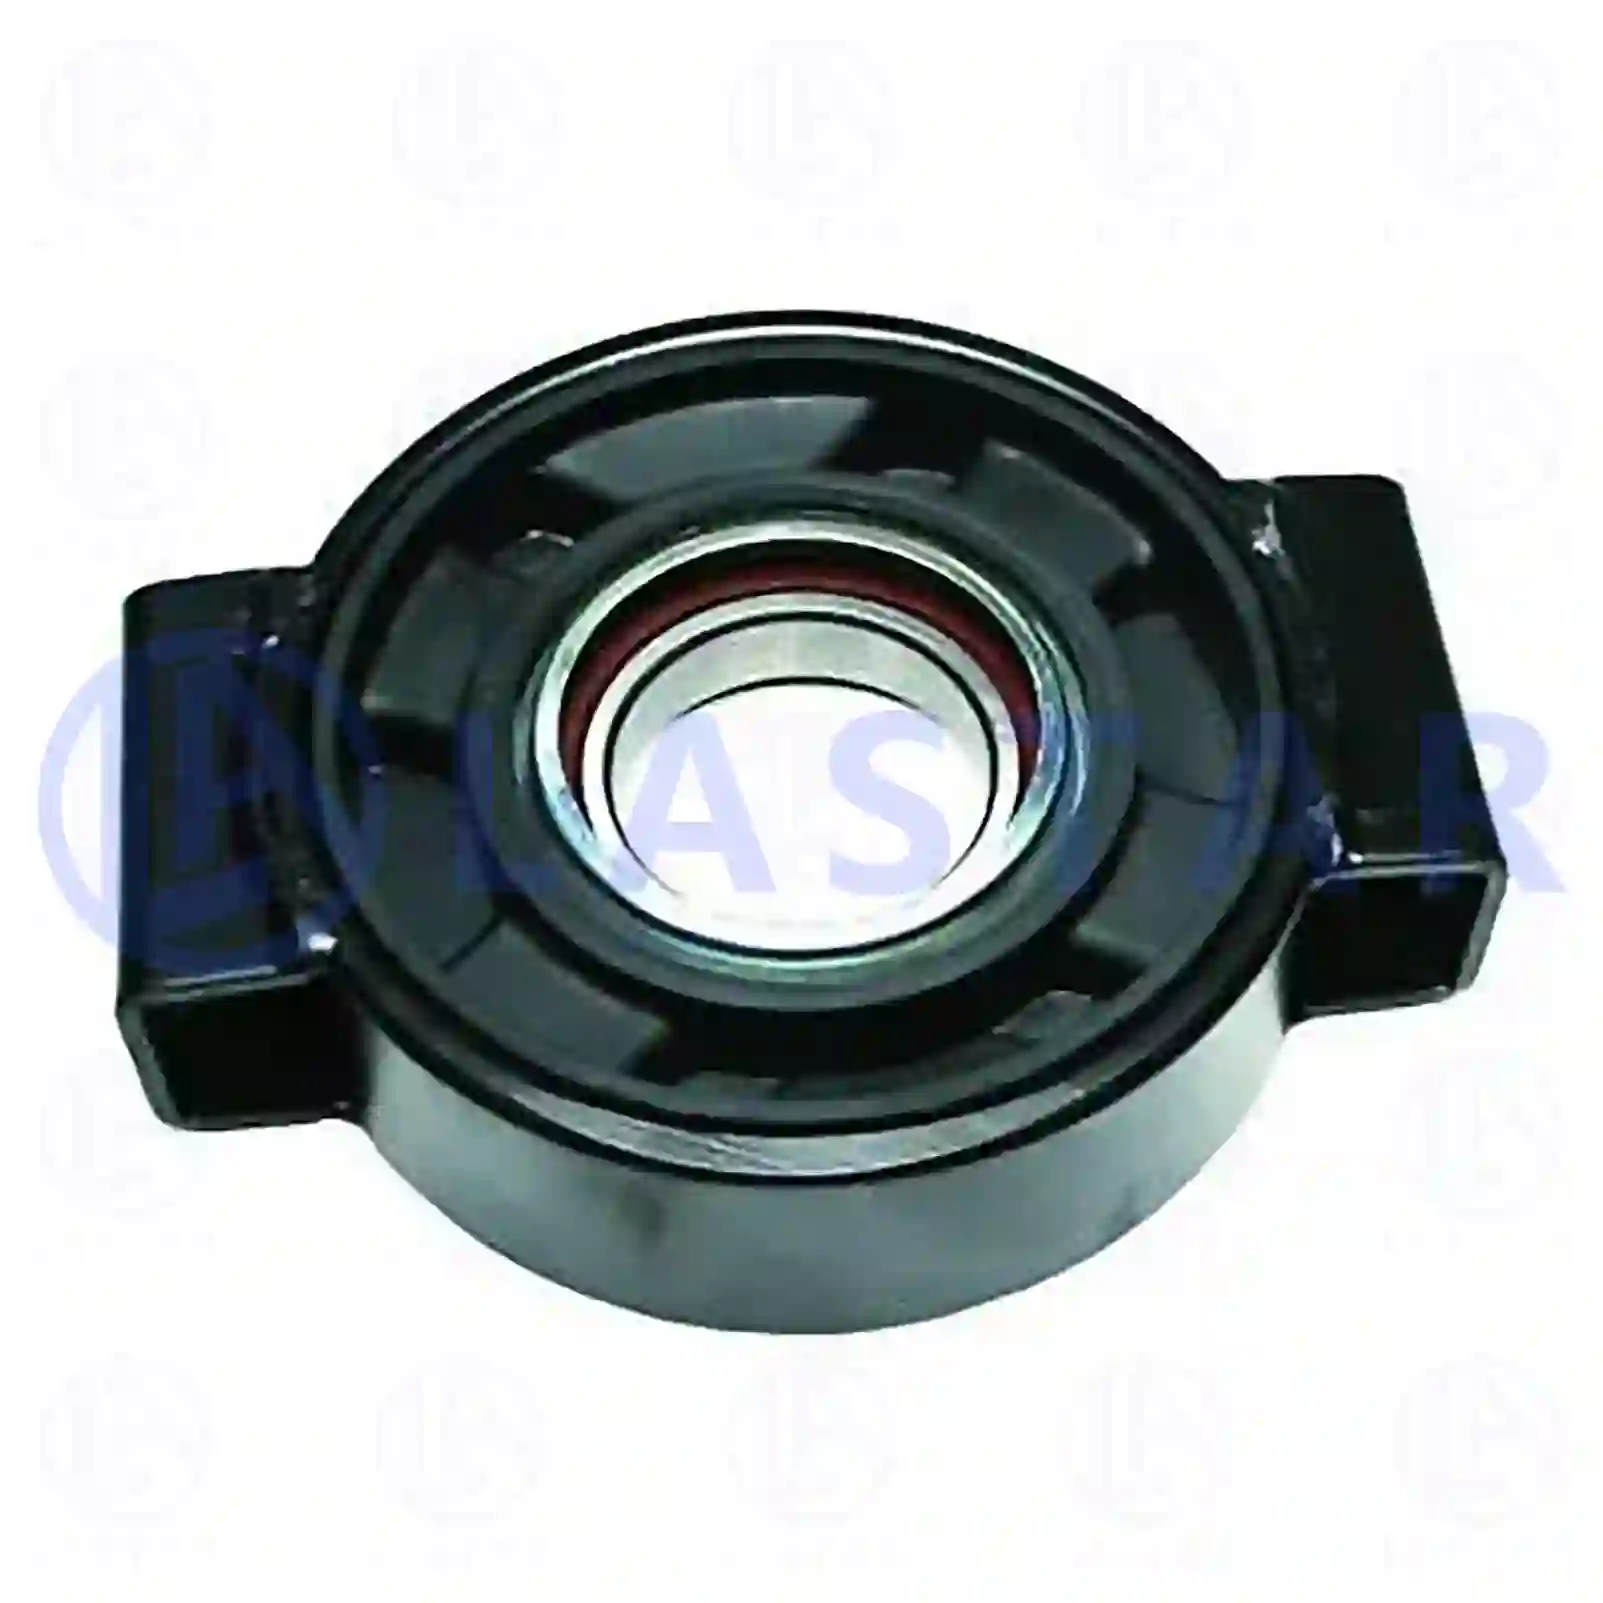 Support Bearing Center bearing, la no: 77734252 ,  oem no:4004100022, 3954100622, 6554100022 Lastar Spare Part | Truck Spare Parts, Auotomotive Spare Parts